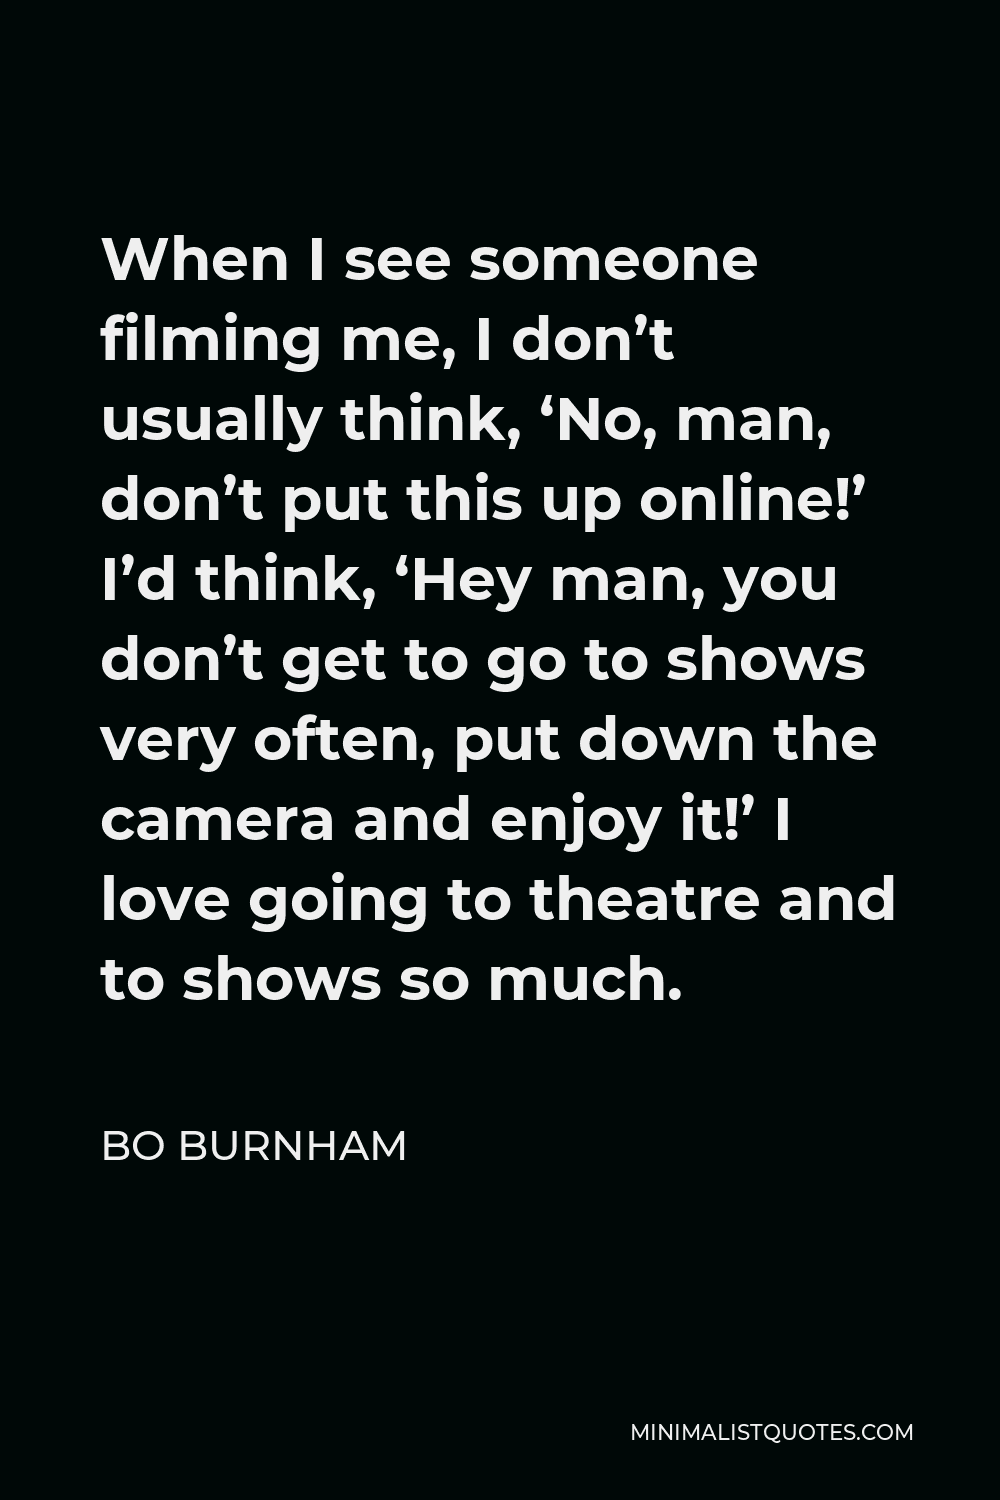 Bo Burnham Quote - When I see someone filming me, I don’t usually think, ‘No, man, don’t put this up online!’ I’d think, ‘Hey man, you don’t get to go to shows very often, put down the camera and enjoy it!’ I love going to theatre and to shows so much.